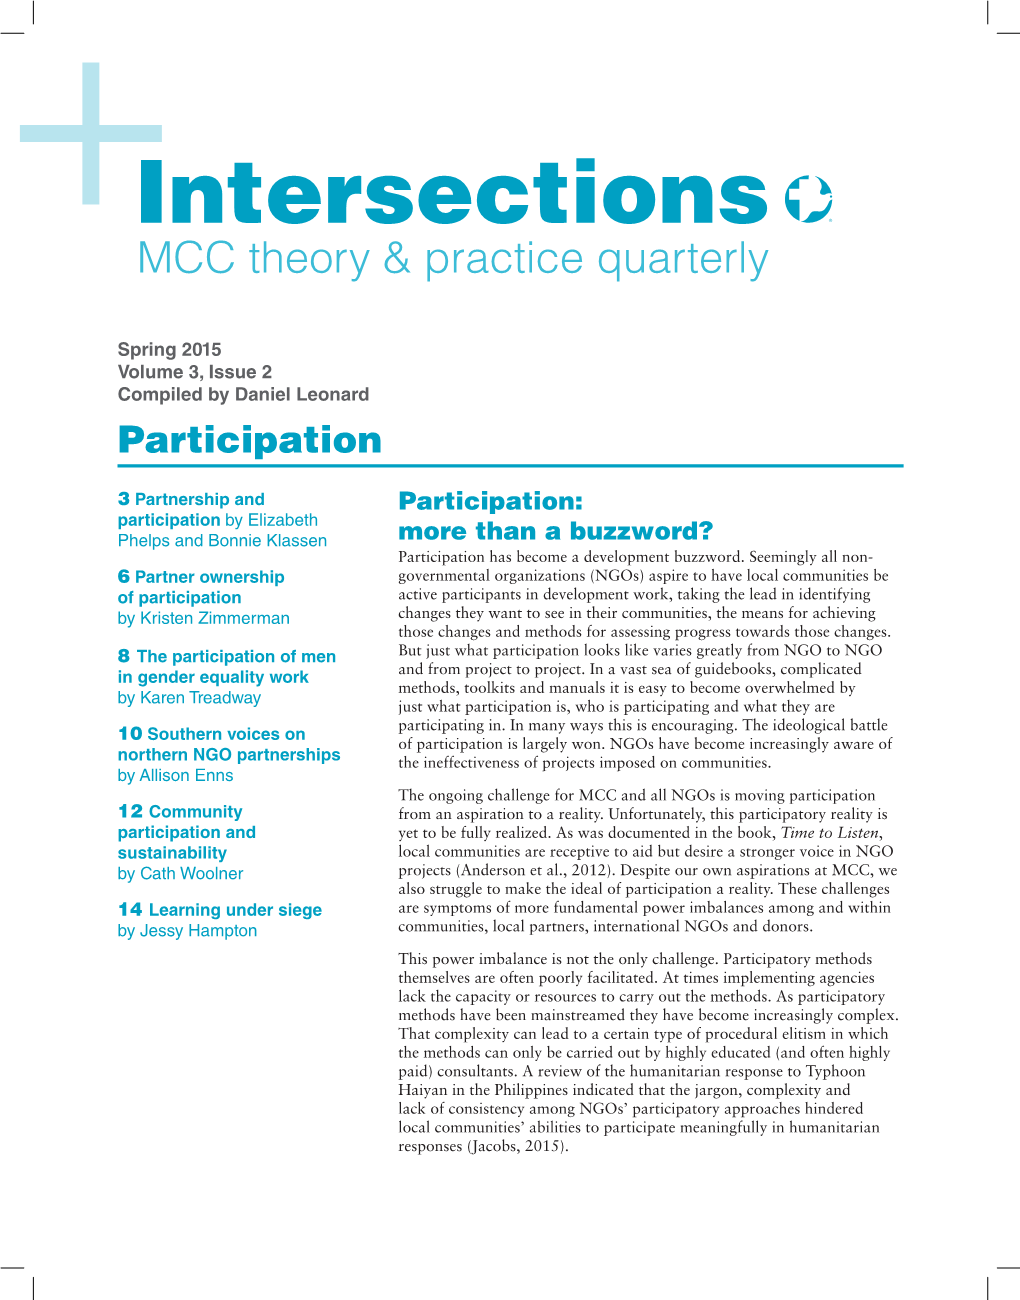 Intersections MCC Theory & Practice Quarterly